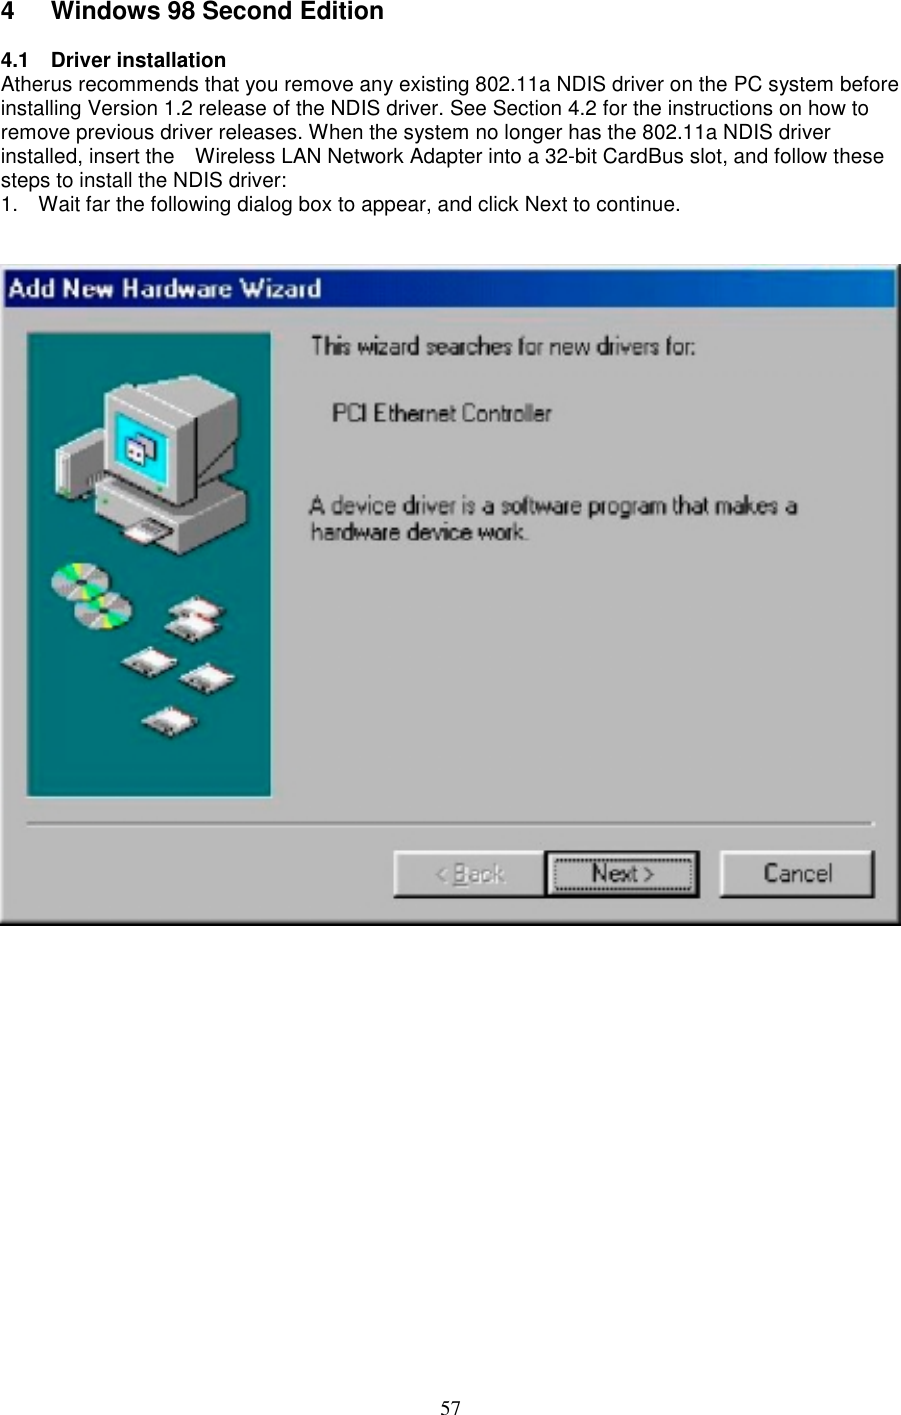 574 Windows 98 Second Edition4.1 Driver installationAtherus recommends that you remove any existing 802.11a NDIS driver on the PC system beforeinstalling Version 1.2 release of the NDIS driver. See Section 4.2 for the instructions on how toremove previous driver releases. When the system no longer has the 802.11a NDIS driverinstalled, insert the    Wireless LAN Network Adapter into a 32-bit CardBus slot, and follow thesesteps to install the NDIS driver:1.  Wait far the following dialog box to appear, and click Next to continue.